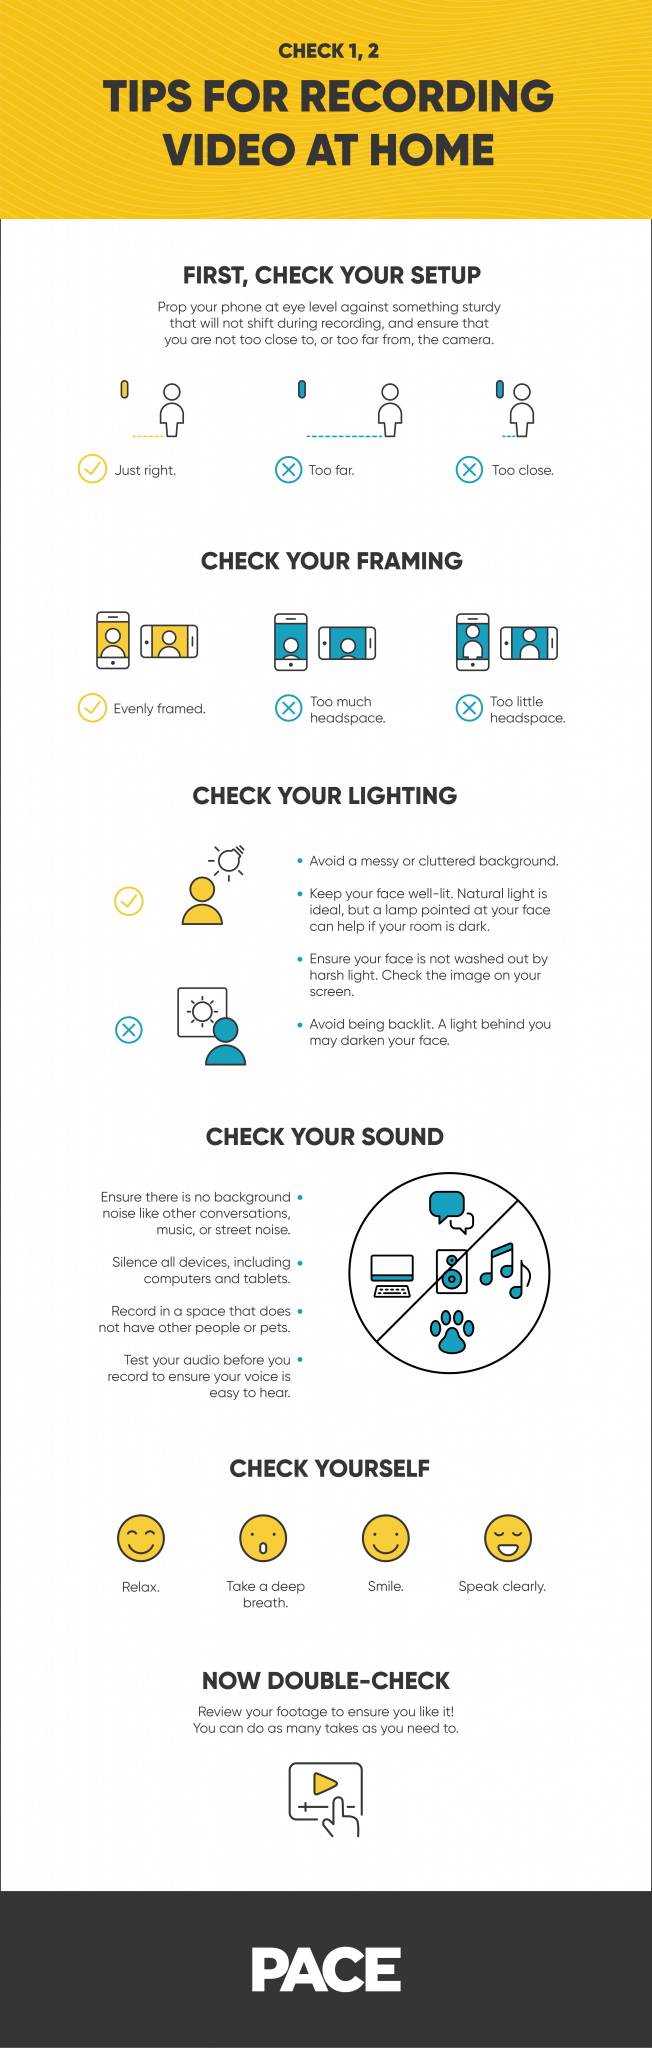 an infographic of tips for recording video at home